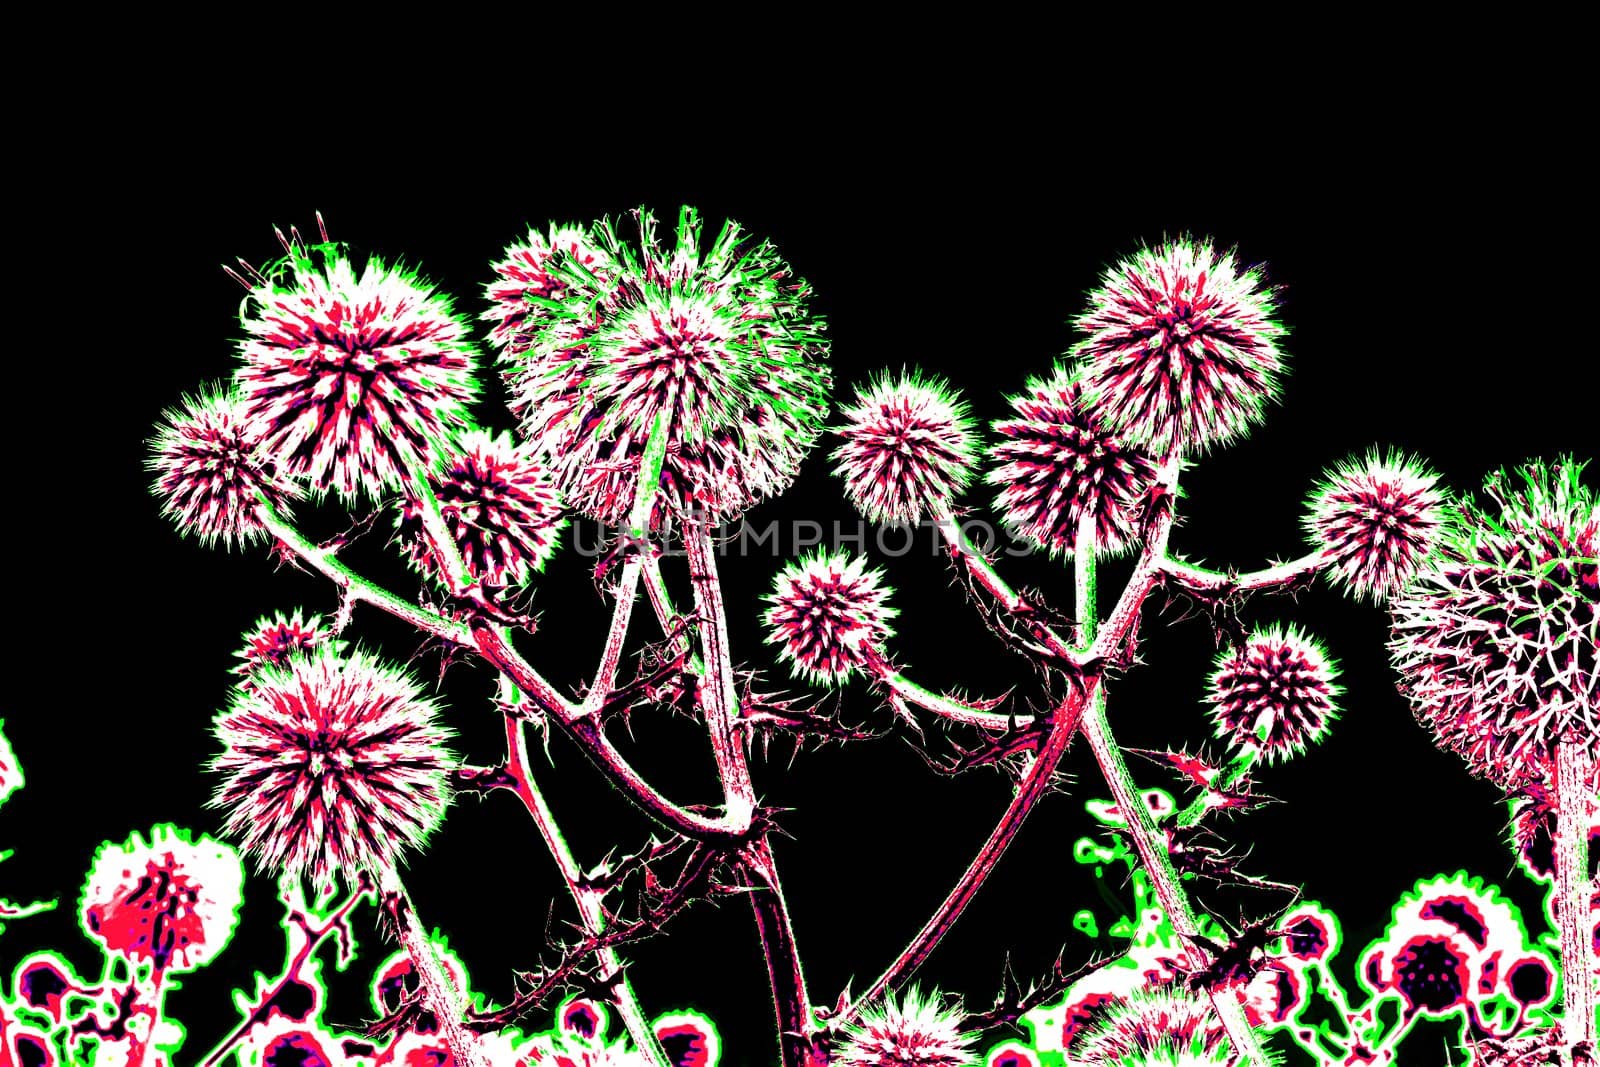 Spherical thistle flowers (Echinops ritro) on the black background. Toned herbal texture in bright saturated colors